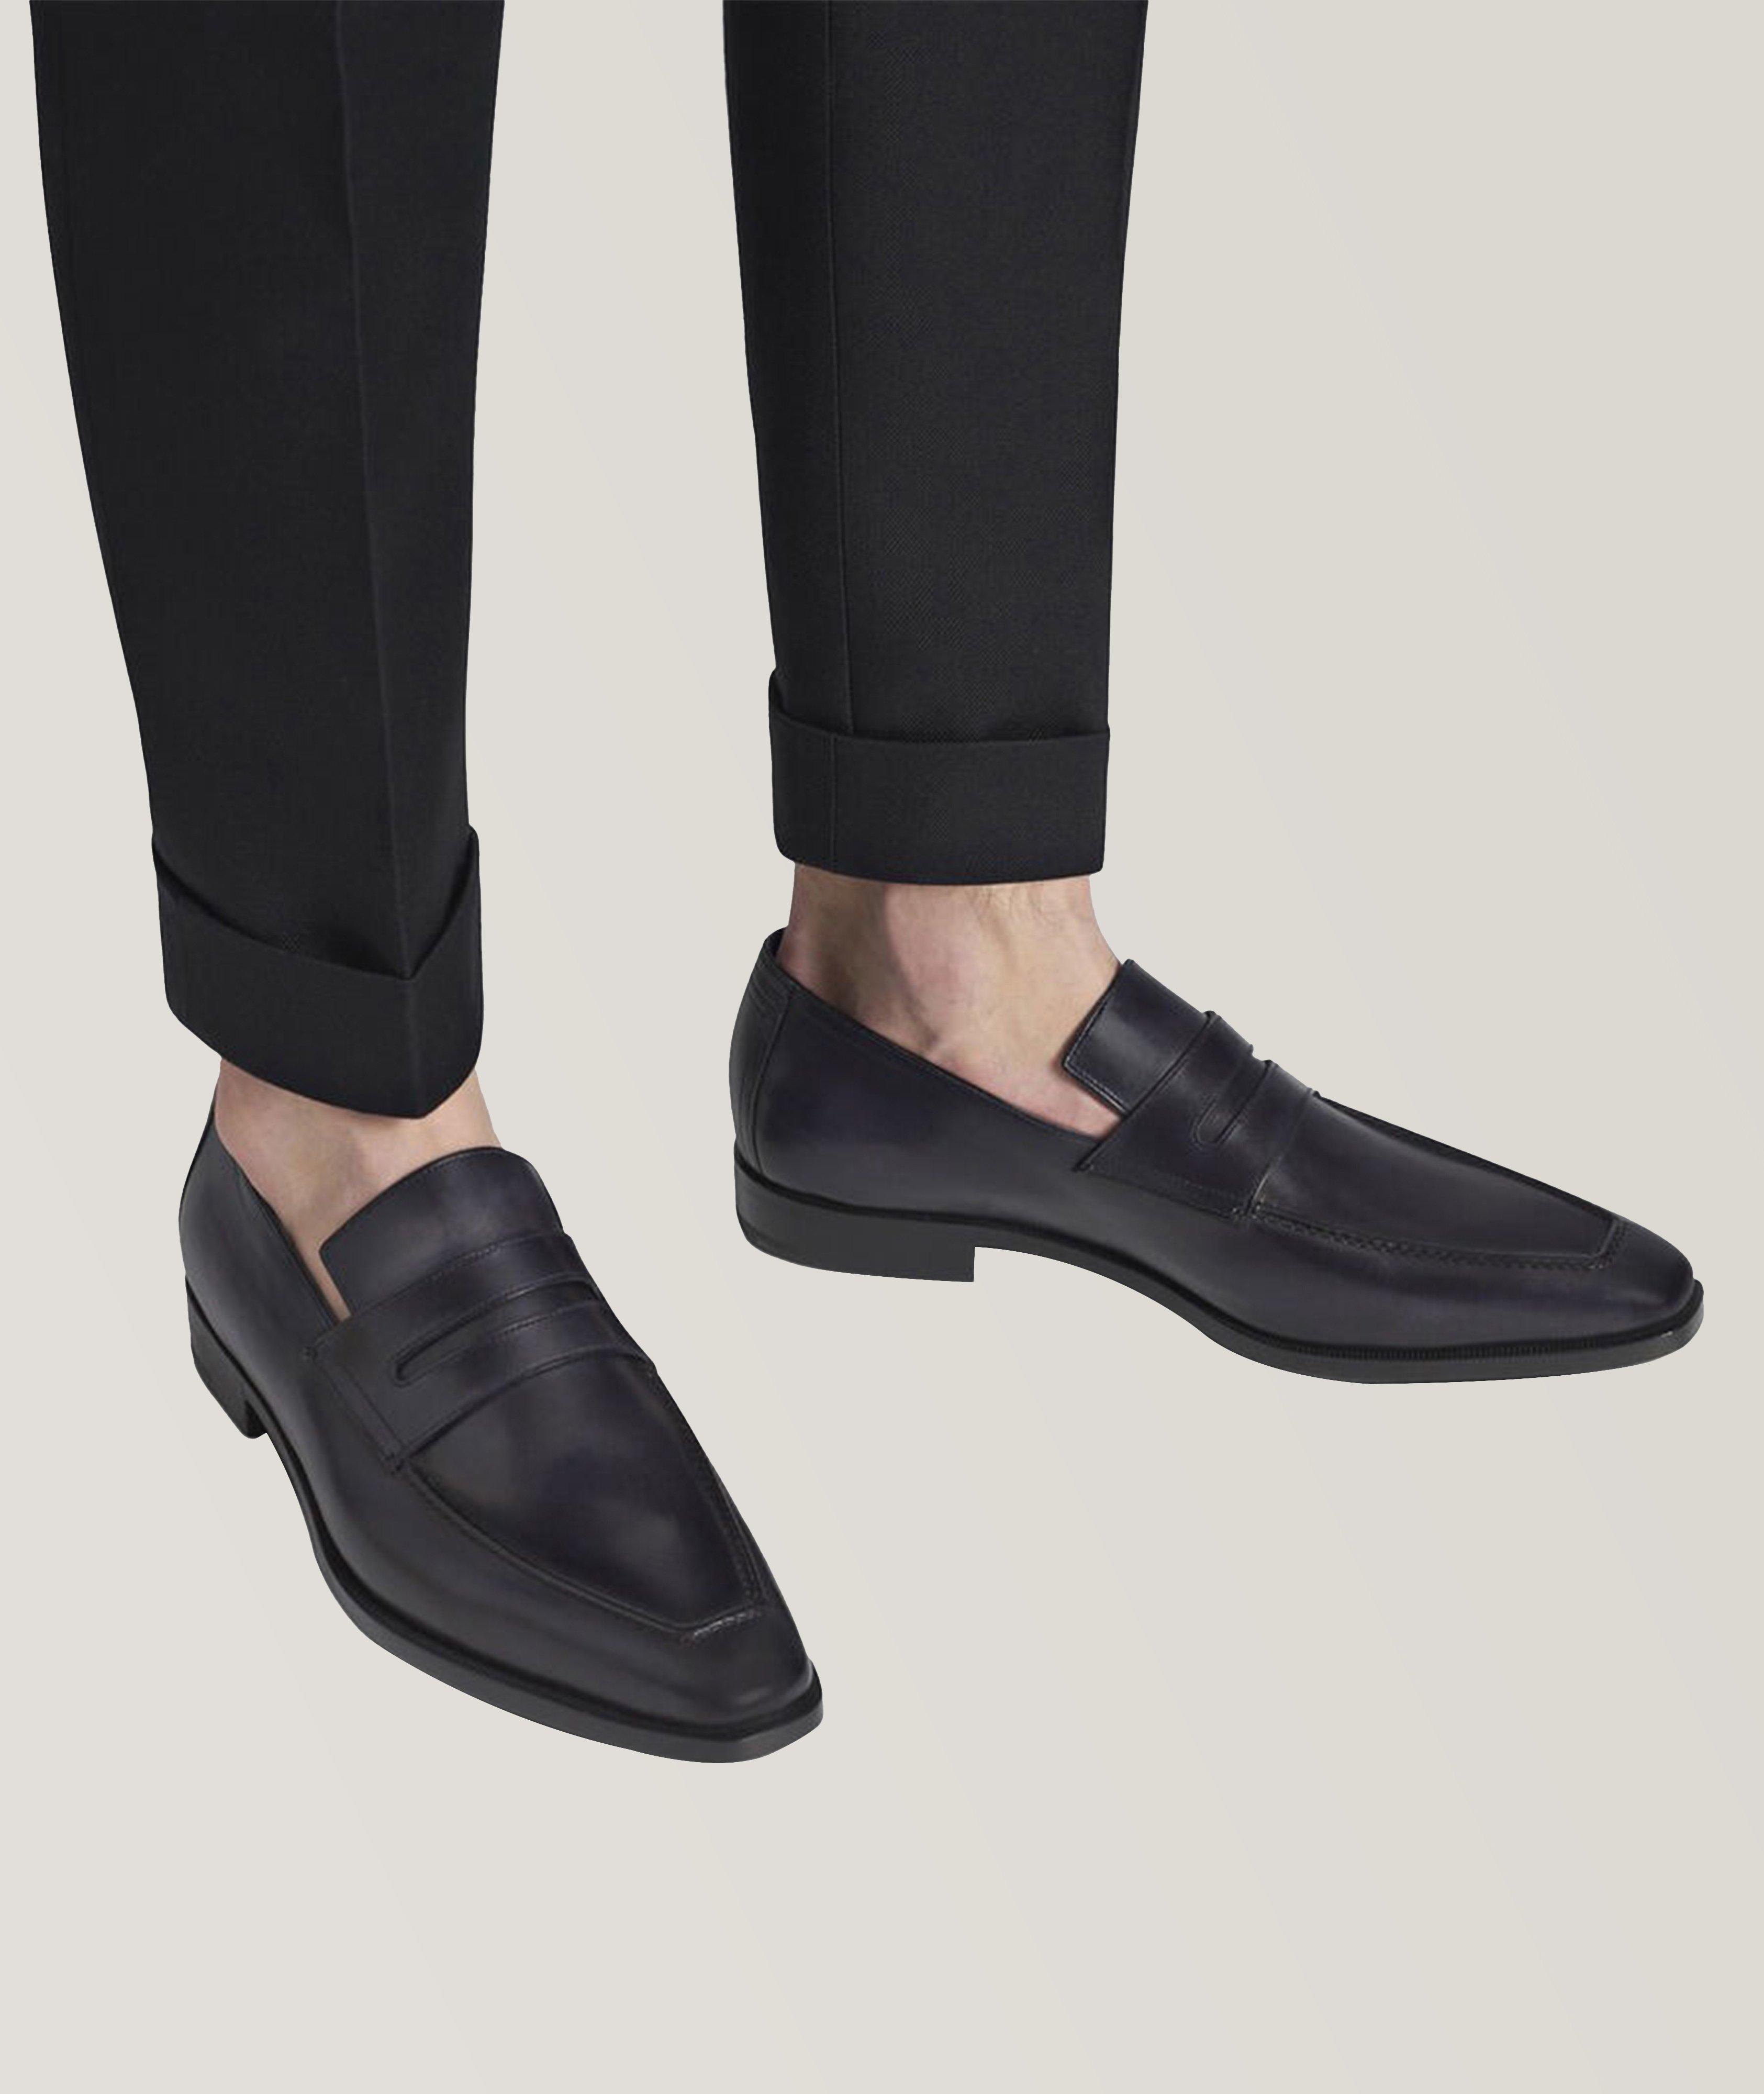 Andy Demesure Leather Loafer image 6